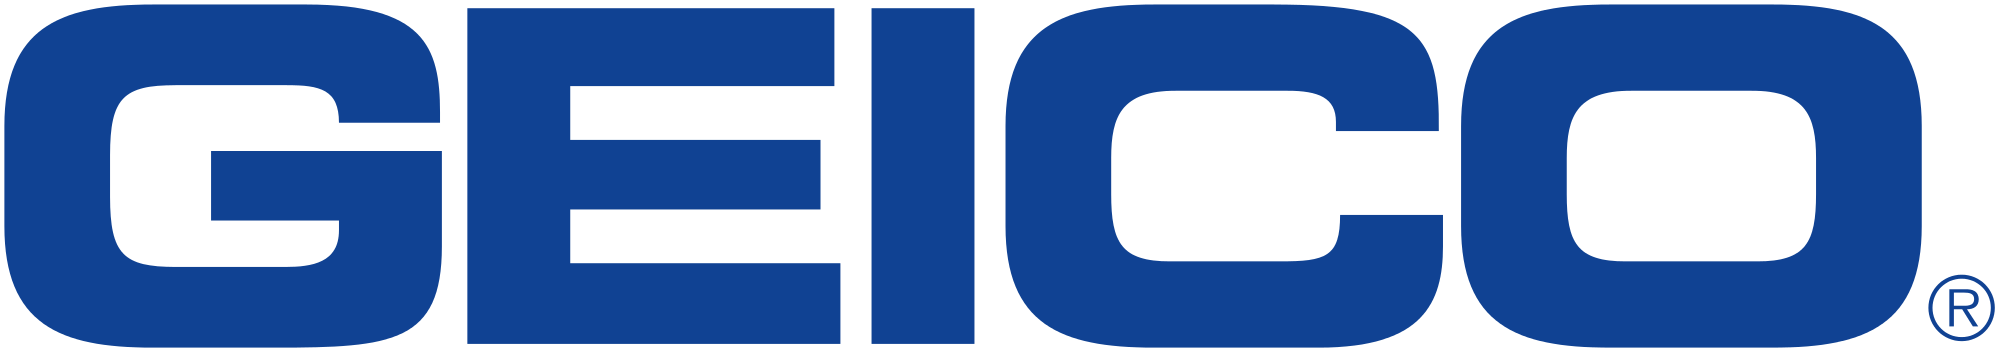 2000px-Geico_logo.svg.png